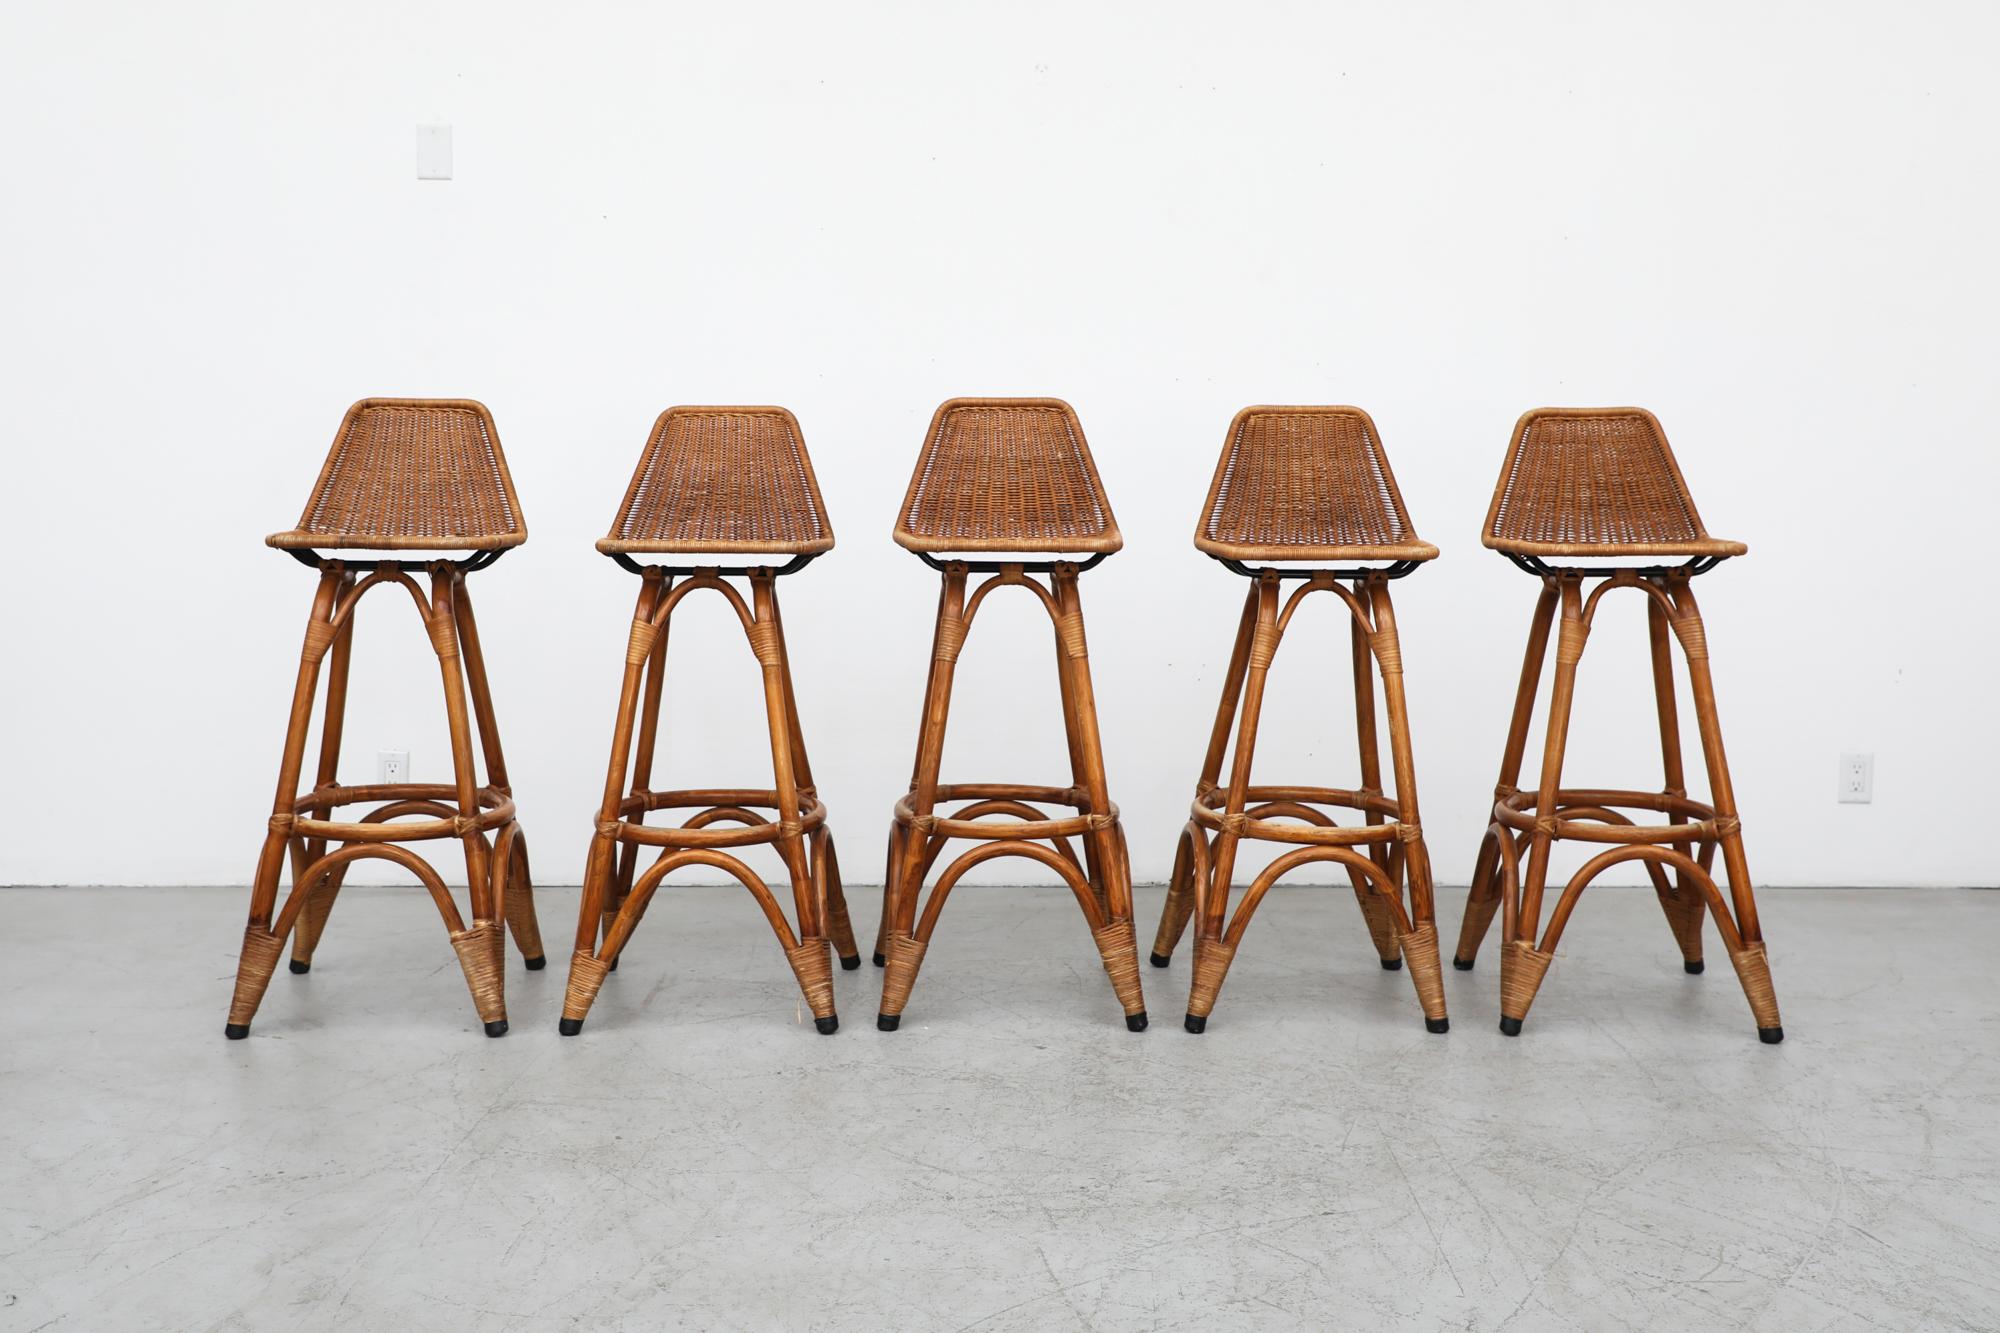 Set of 5 tall Rohe Noordwolde midcentury bamboo bar stools with rattan seating. Seat height is 35.25